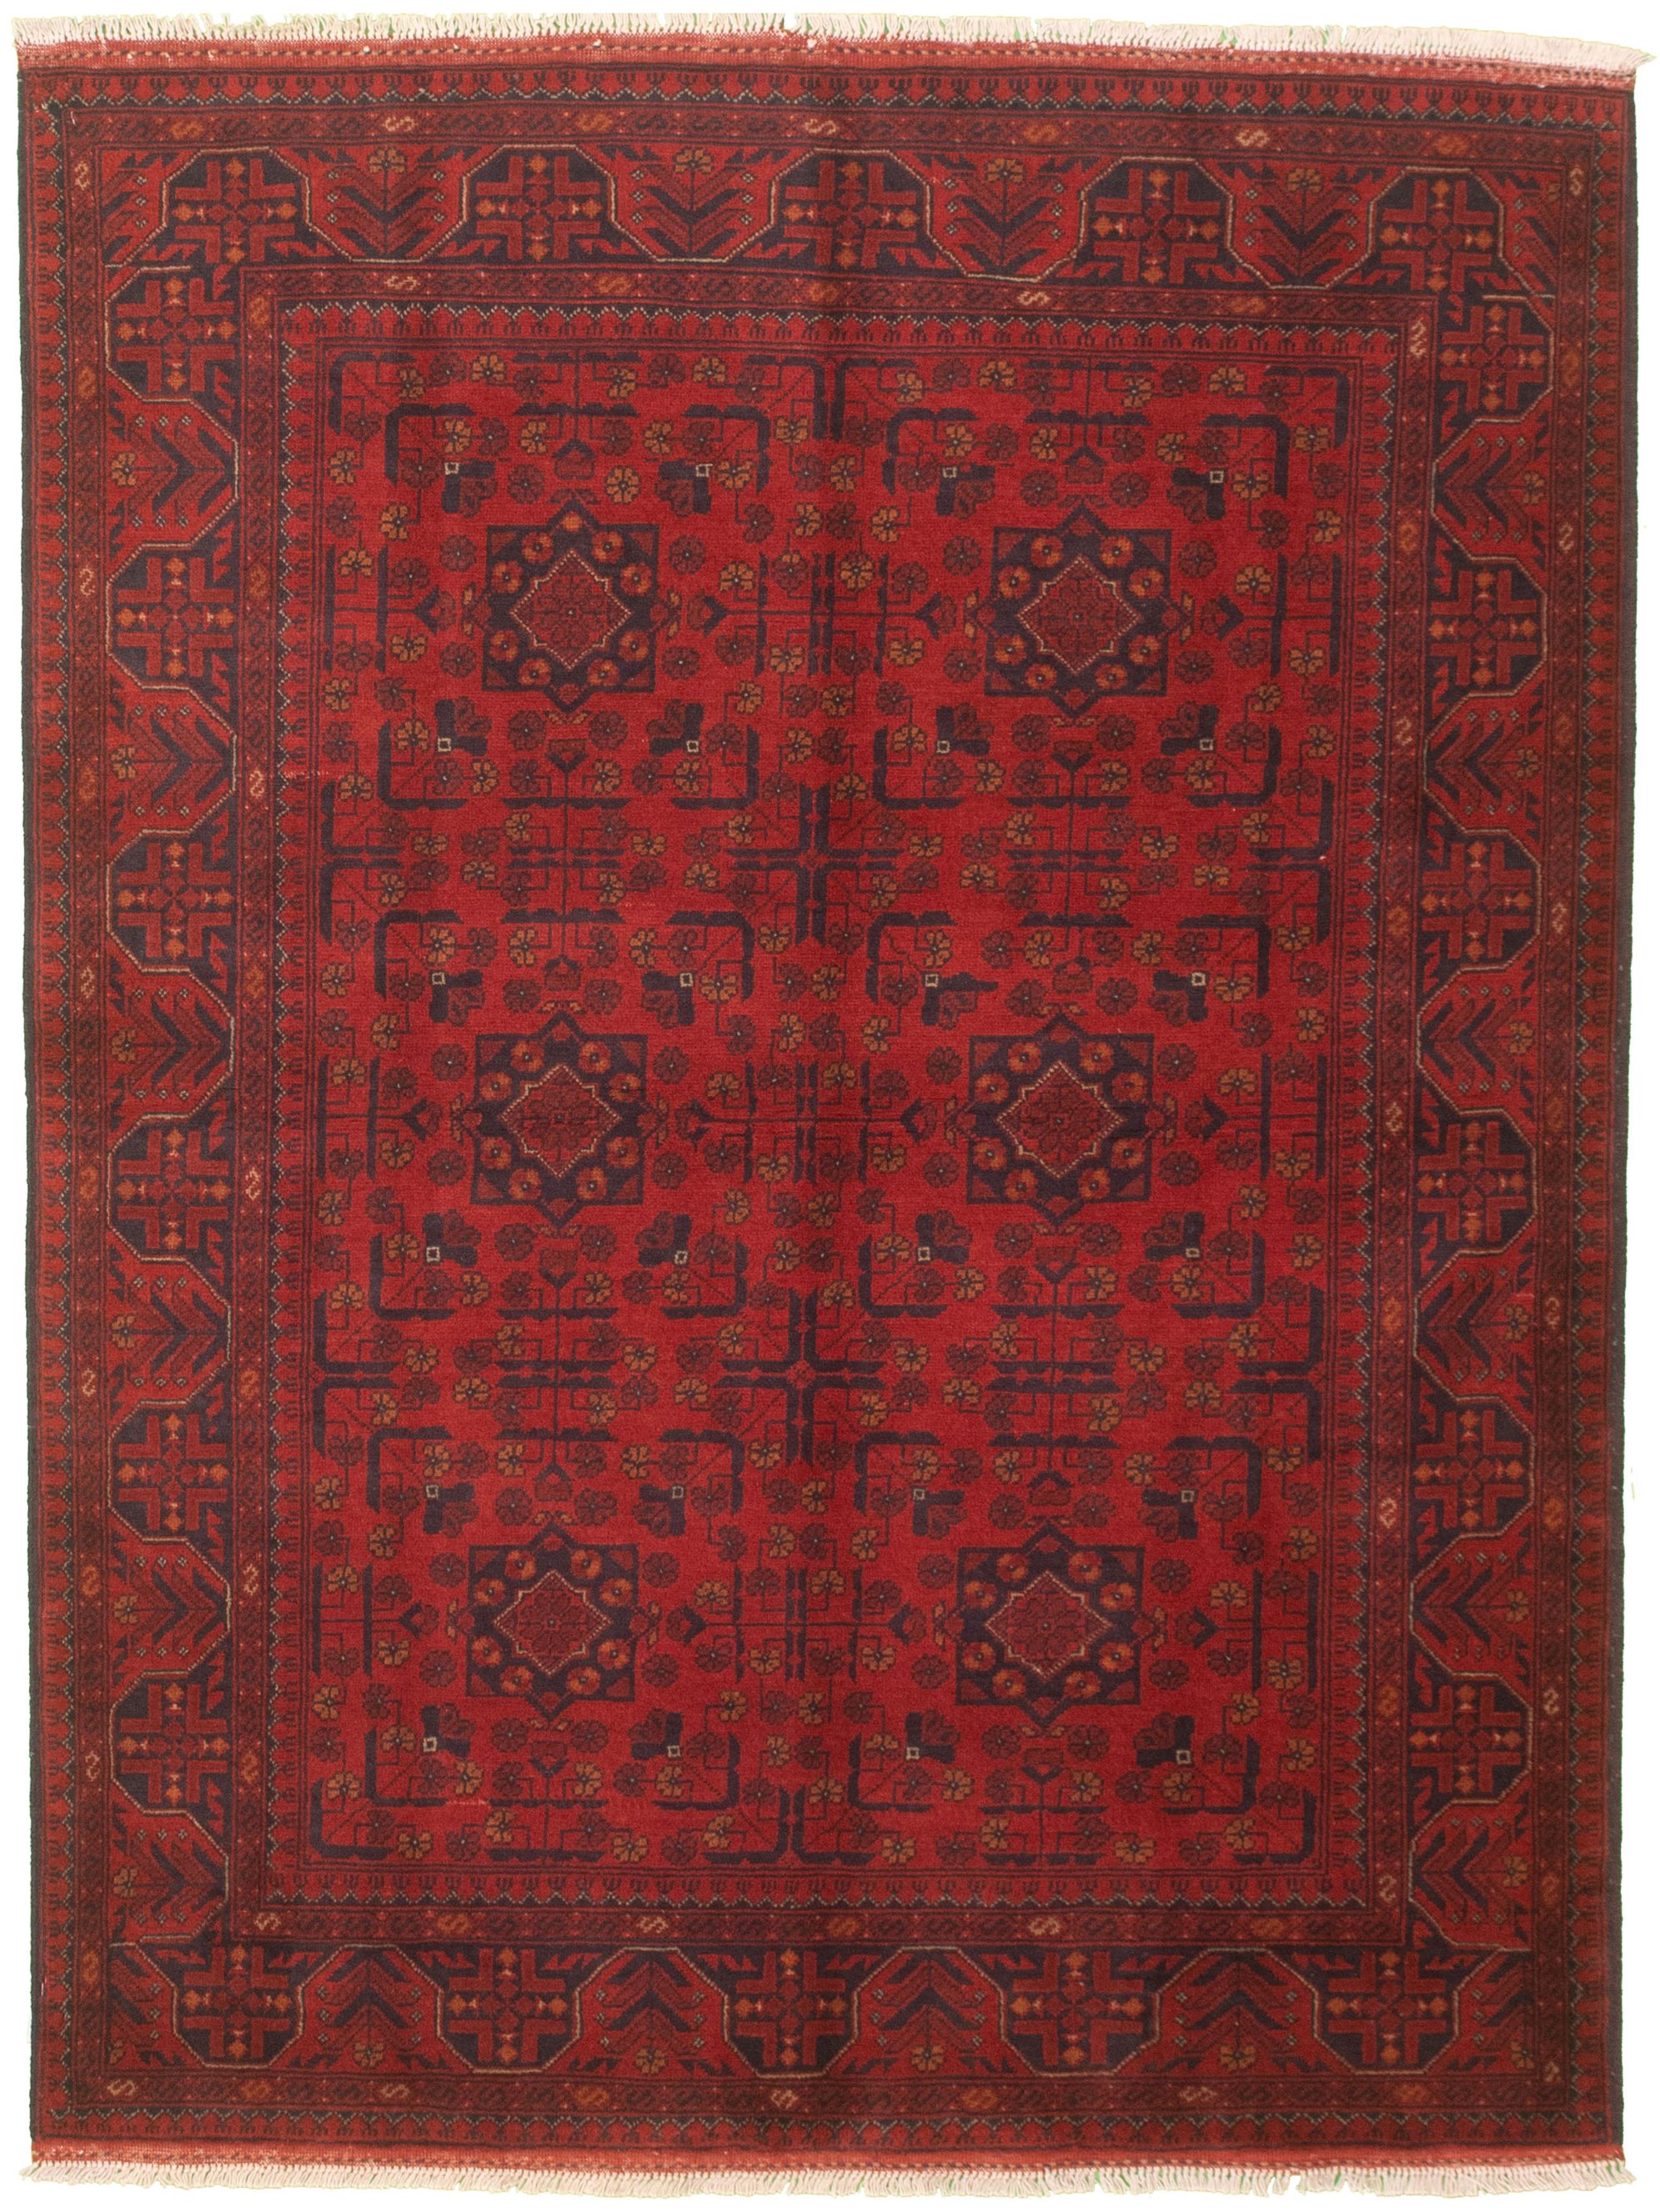 Hand-knotted Finest Khal Mohammadi Red Wool Rug 4'11" x 6'6" (25) Size: 4'11" x 6'6"  